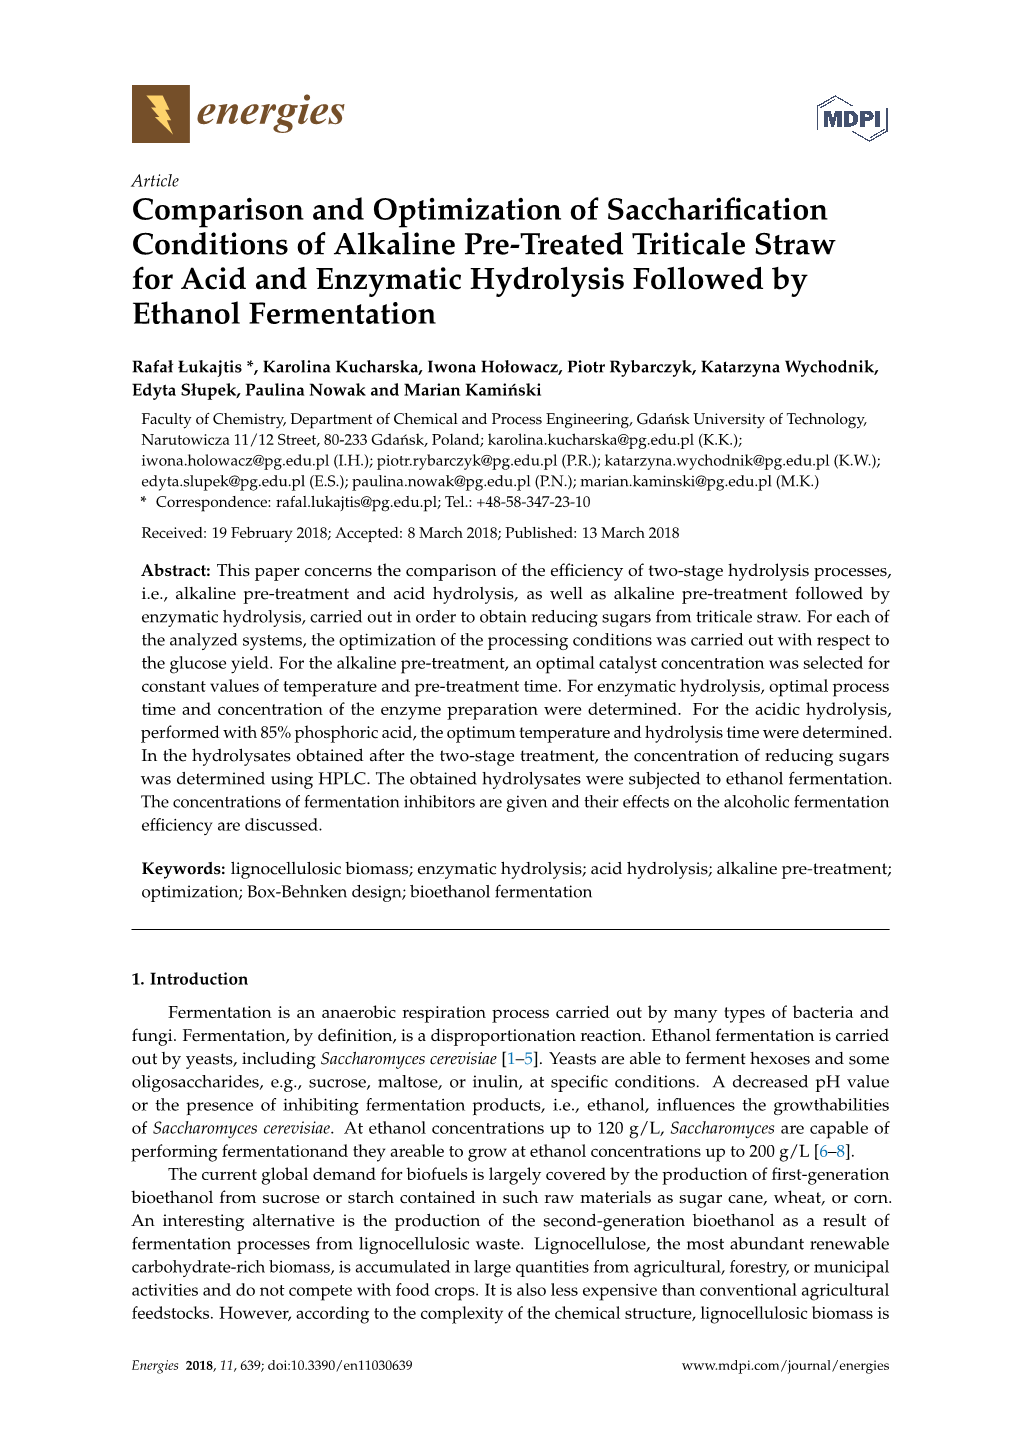 Comparison and Optimization of Saccharification Conditions of Alkaline Pre-Treated Triticale Straw for Acid and Enzymatic Hydrol